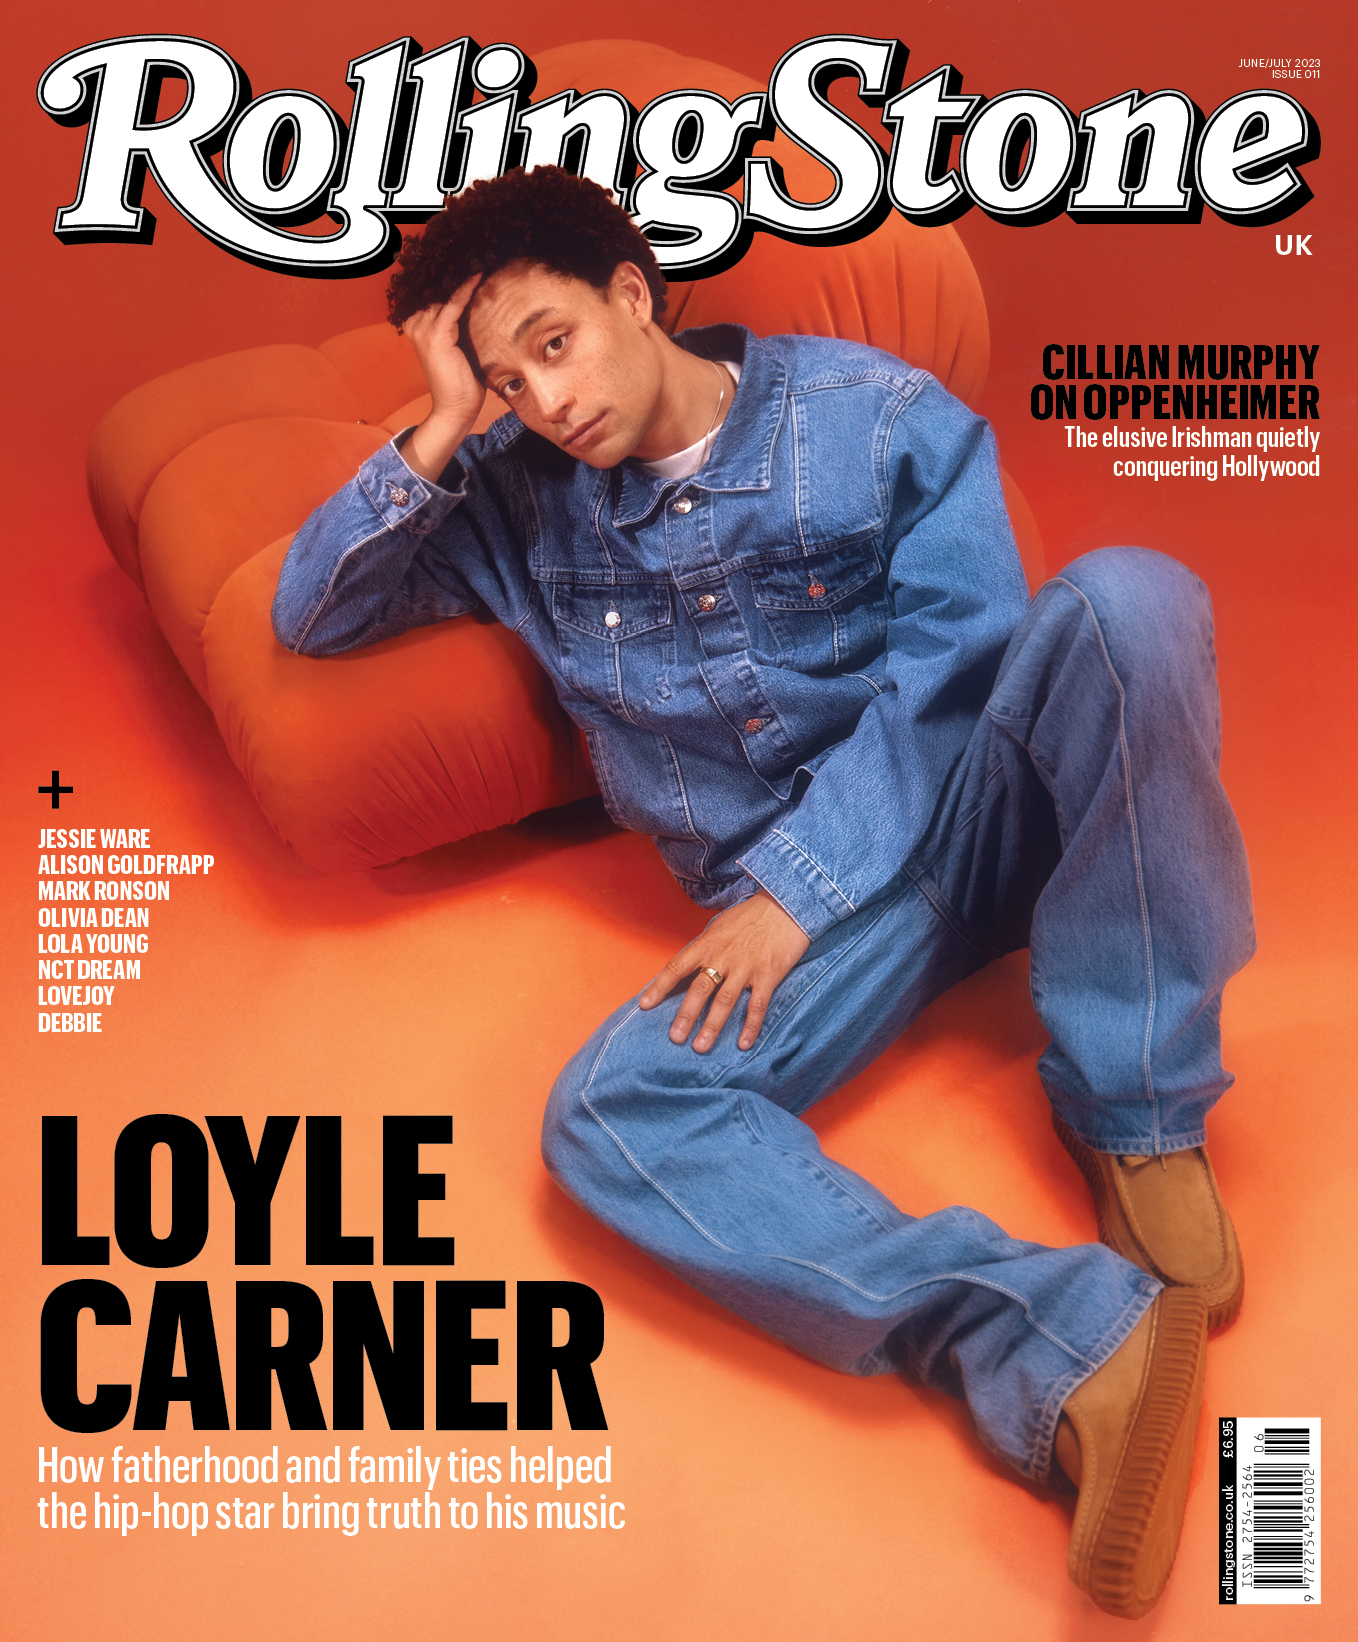 Back Issue - Issue 11 - Loyle Carner